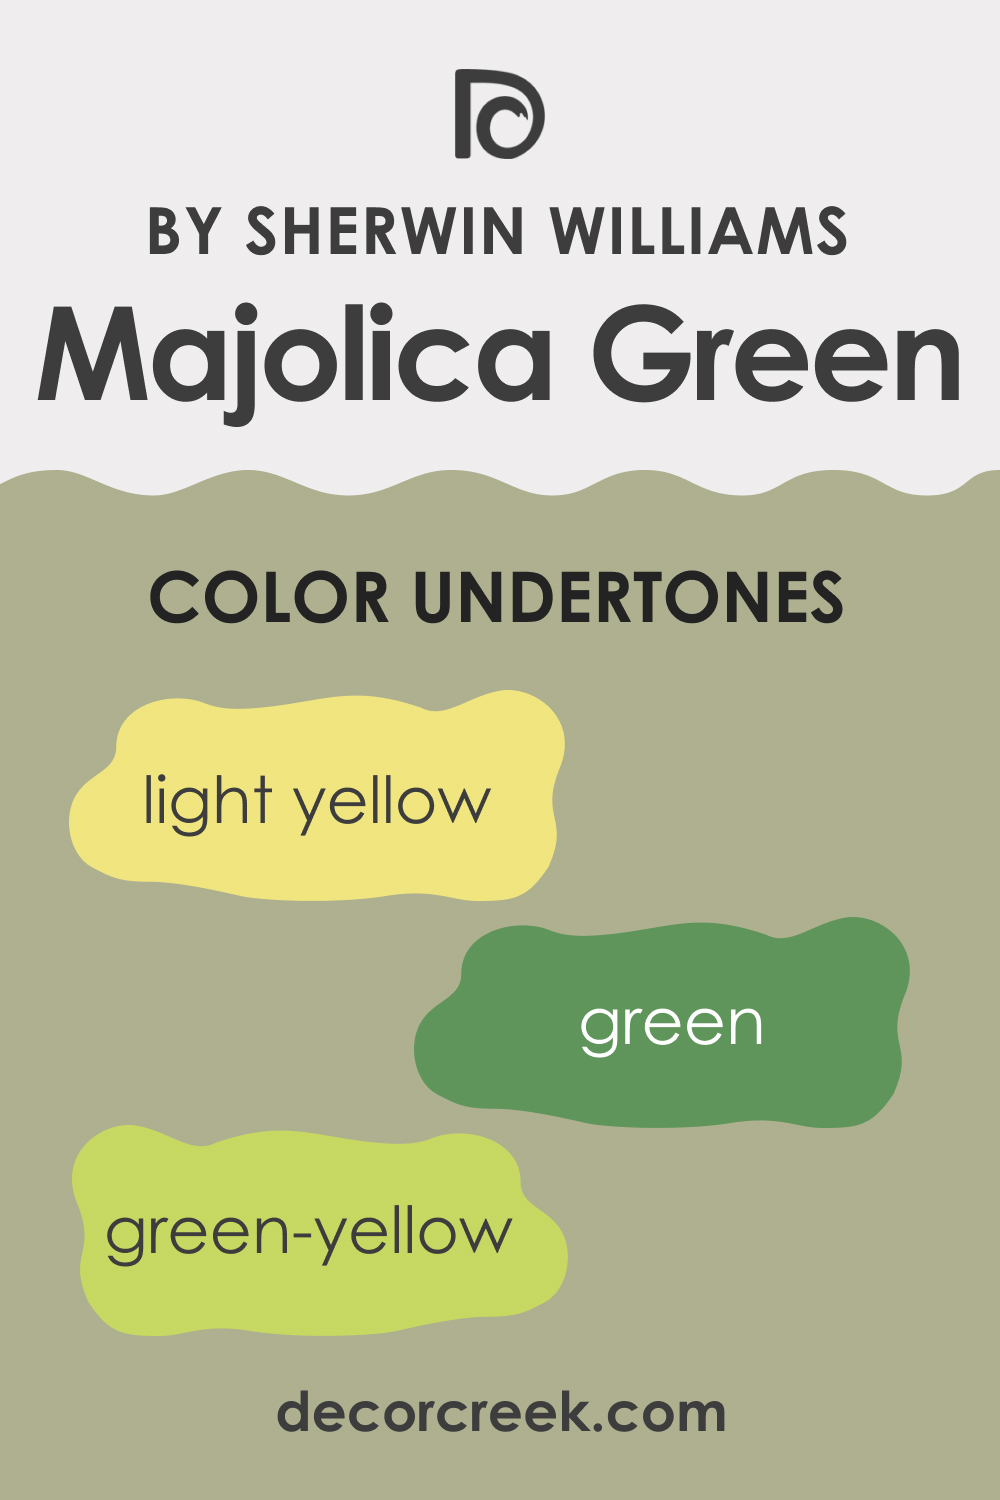 What Undertones Does Majolica Green SW-0013 Have?